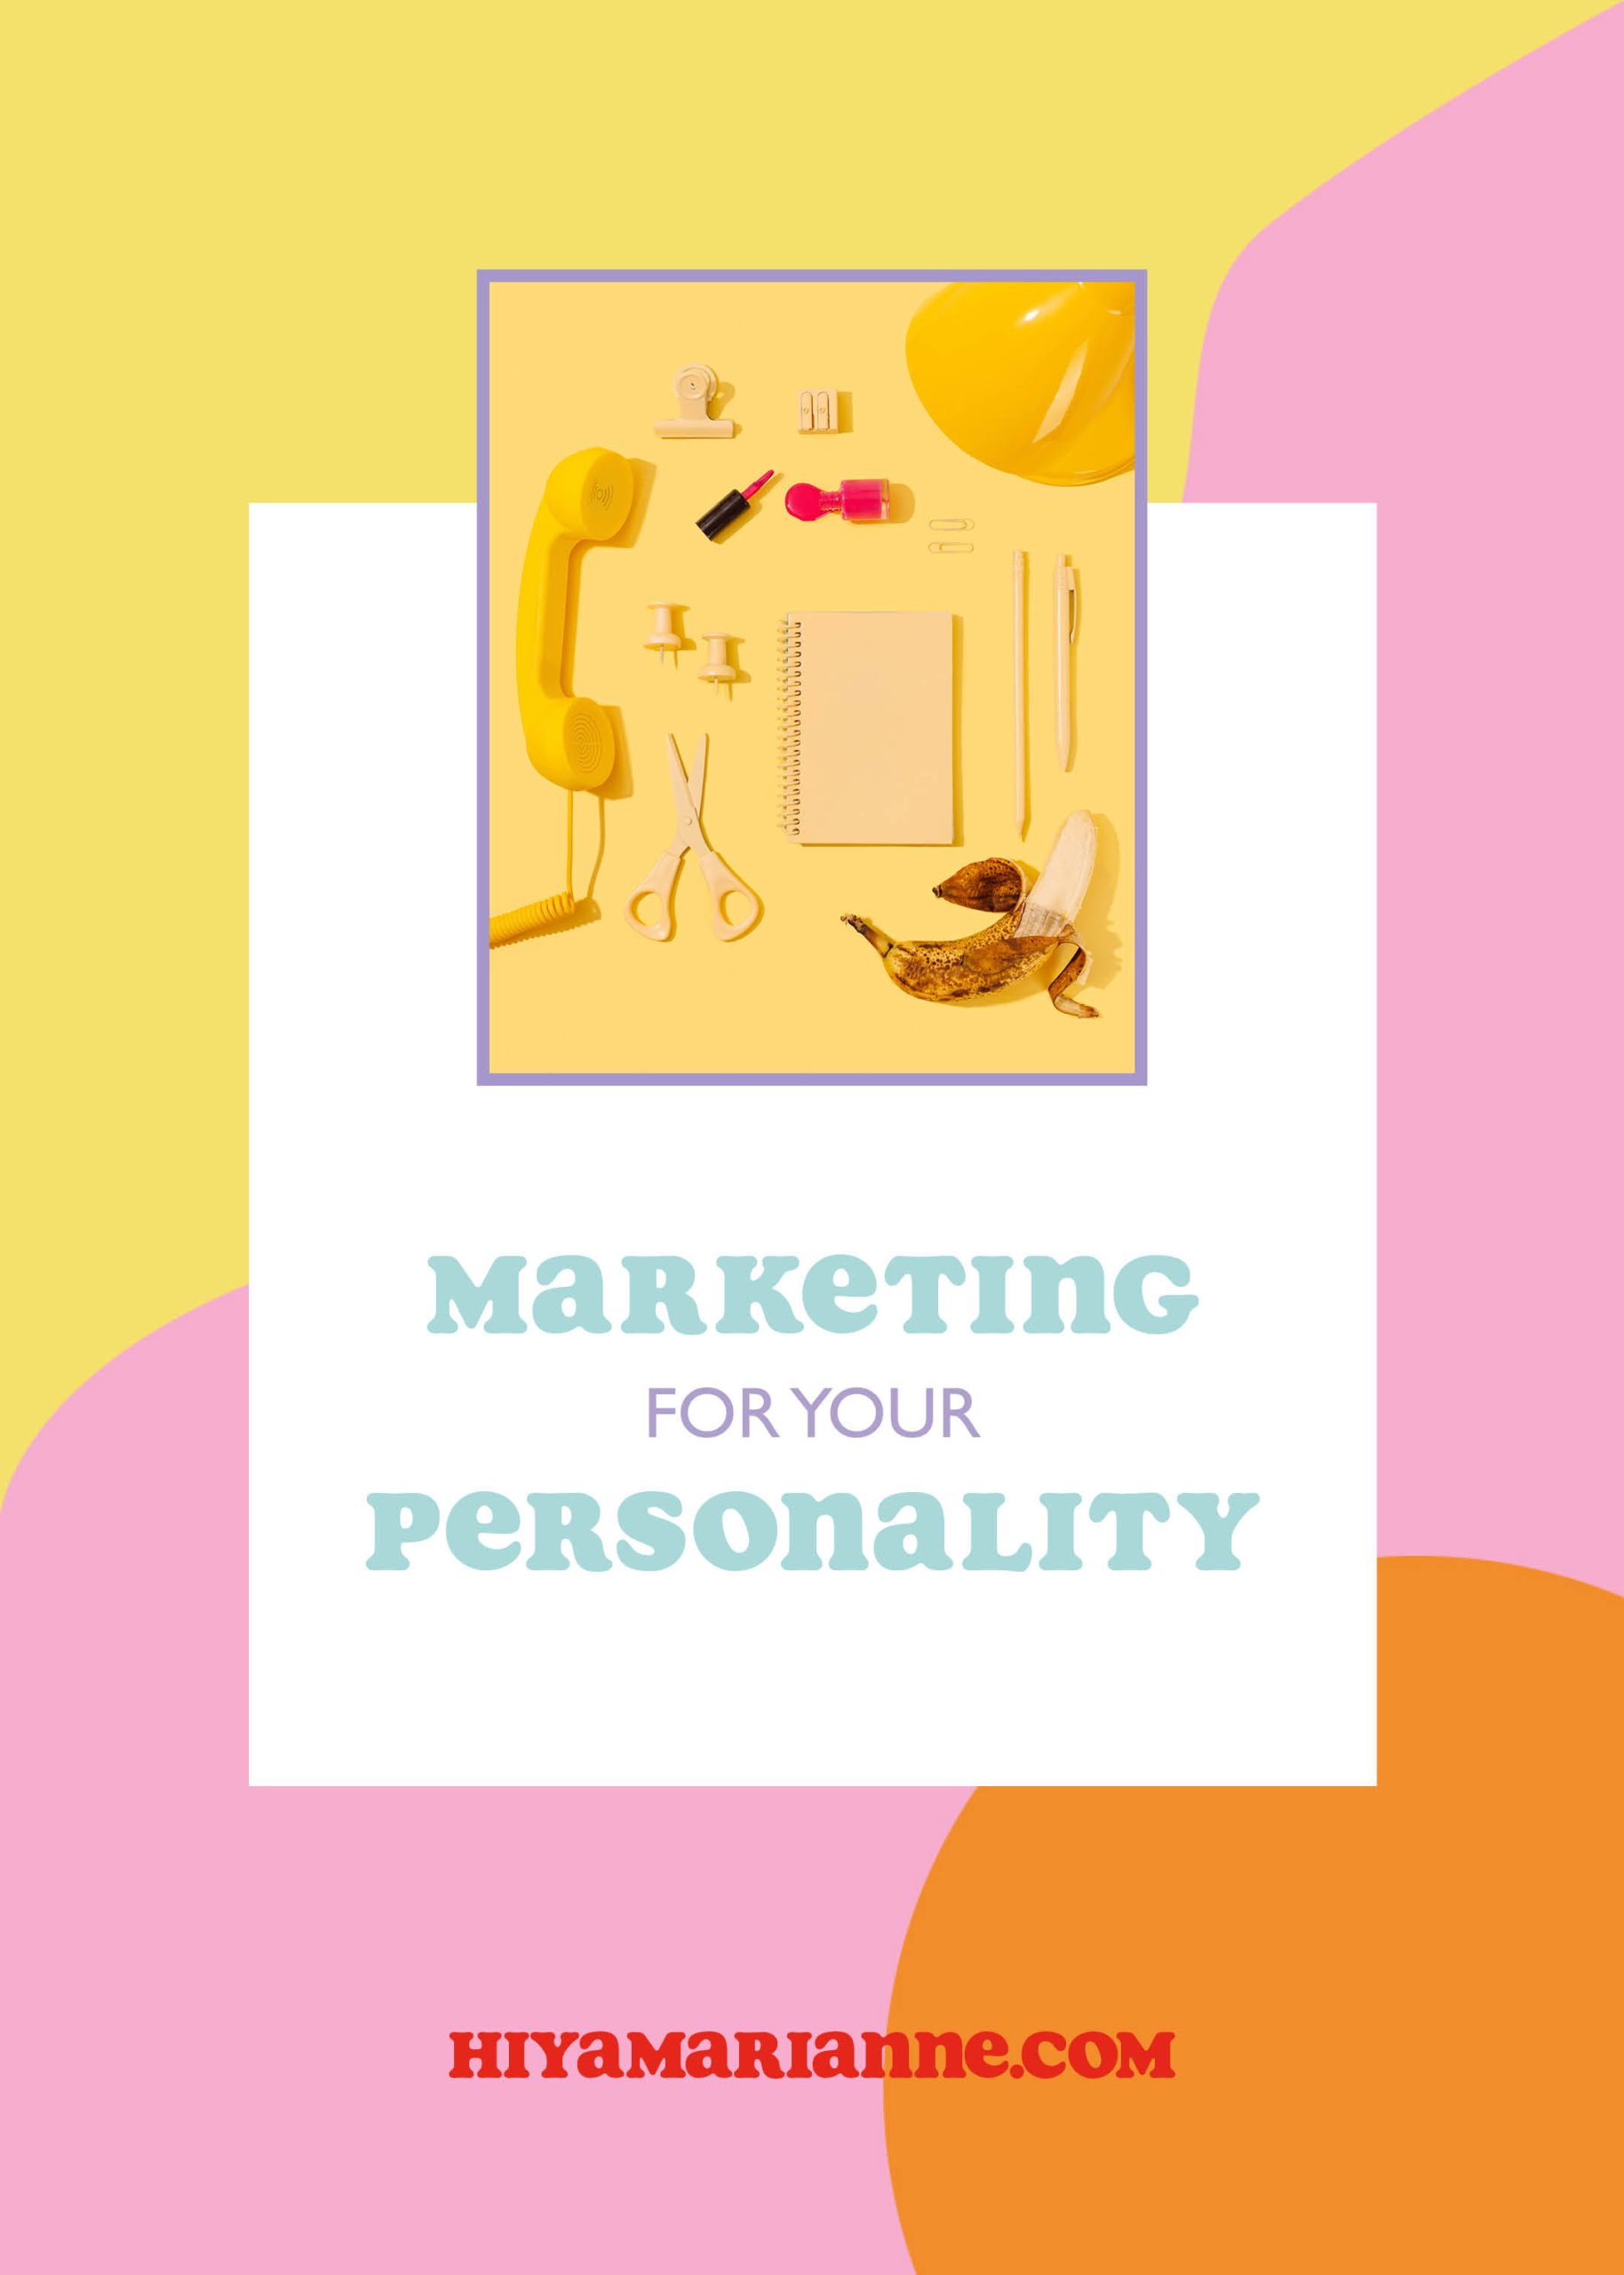 Marketing for your personality type - by HIYA MARIANNE